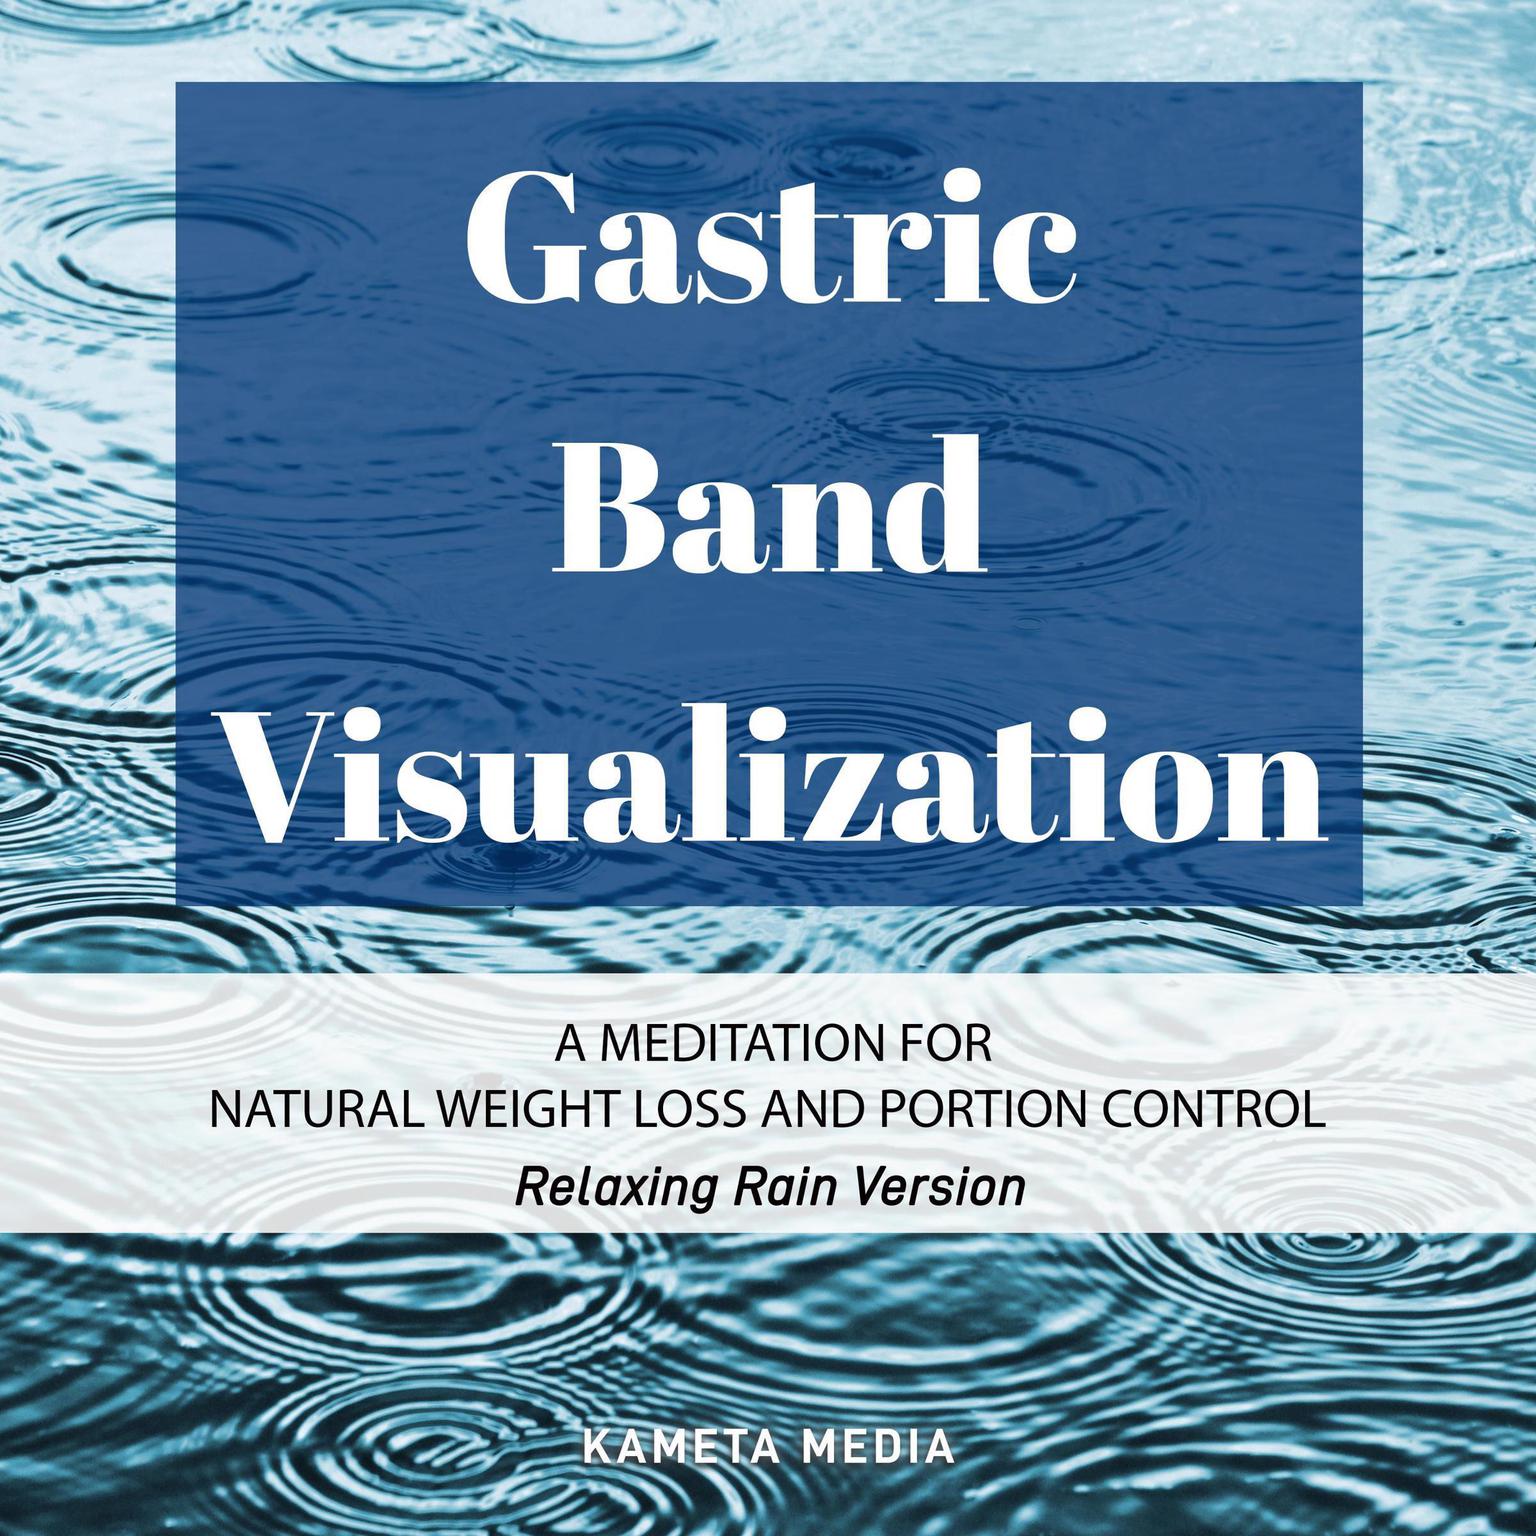 Gastric Band Visualization: A Meditation for Natural Weight Loss and Portion Control (Relaxing Rain Version) Audiobook, by Kameta Media